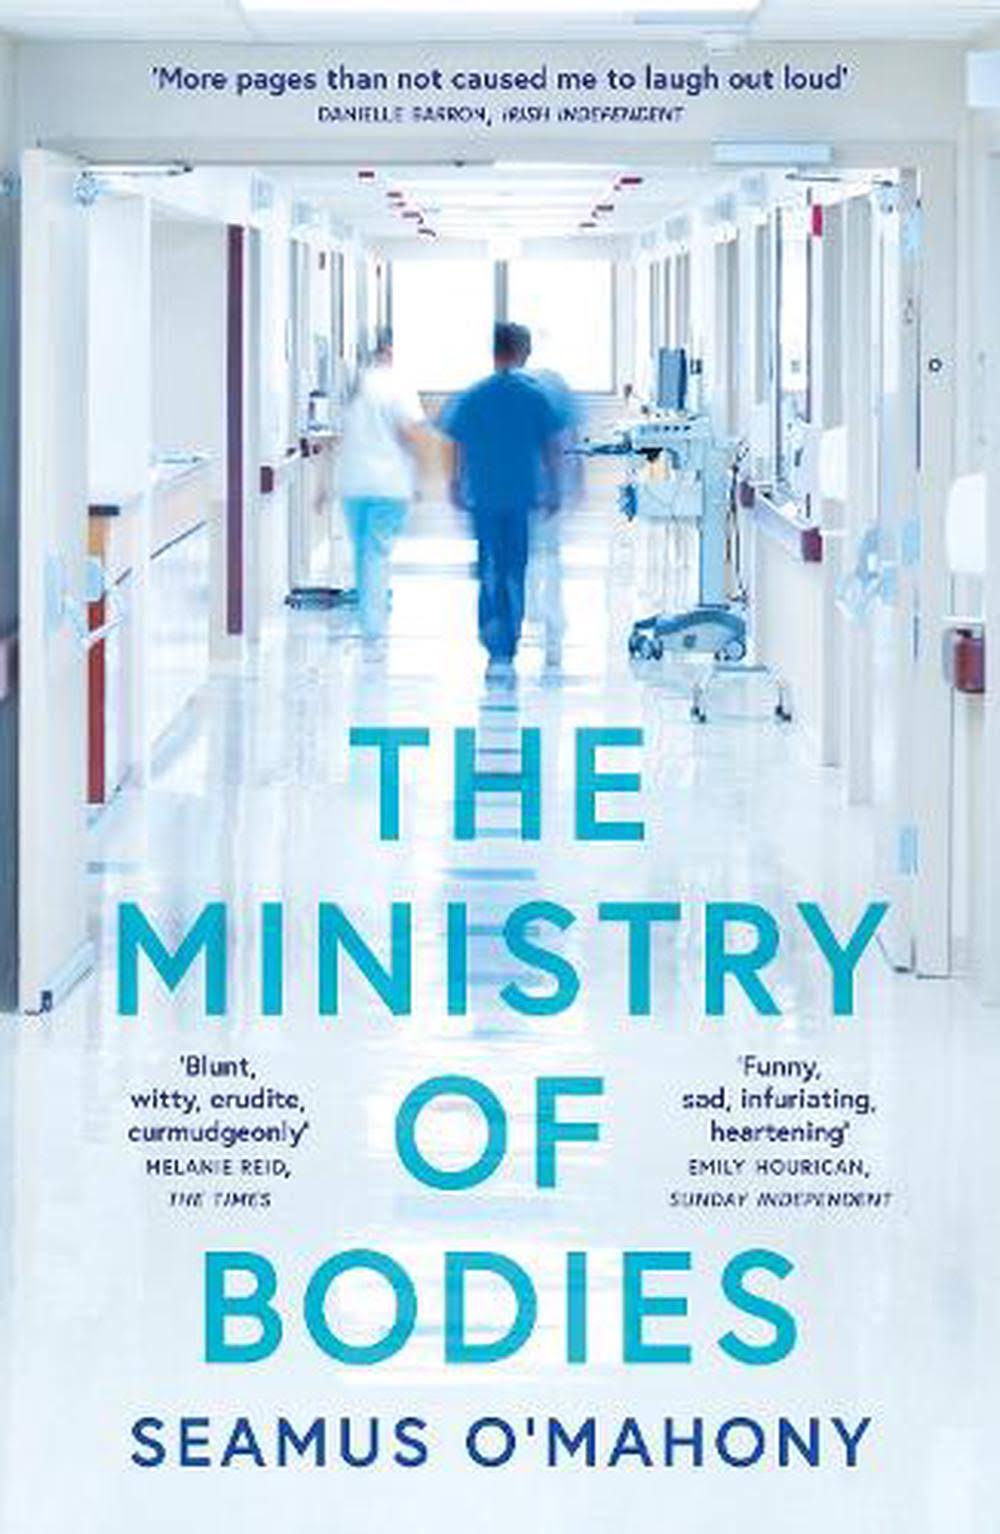 The Ministry of Bodies by Seamus O'Mahony